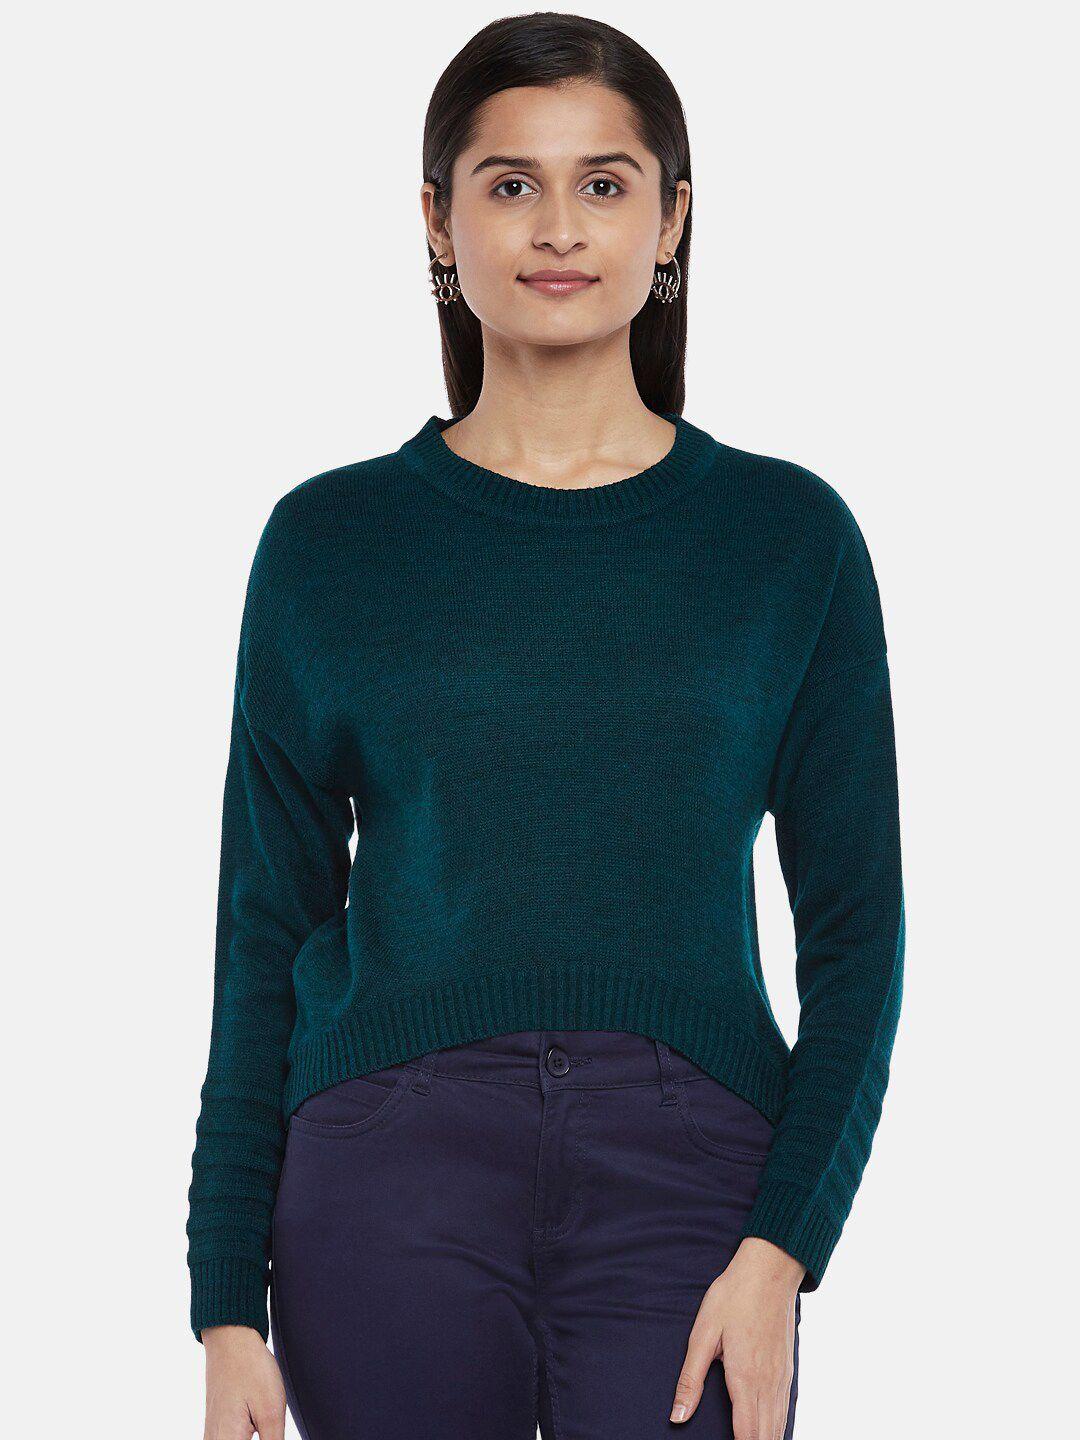 honey by pantaloons women teal pullover